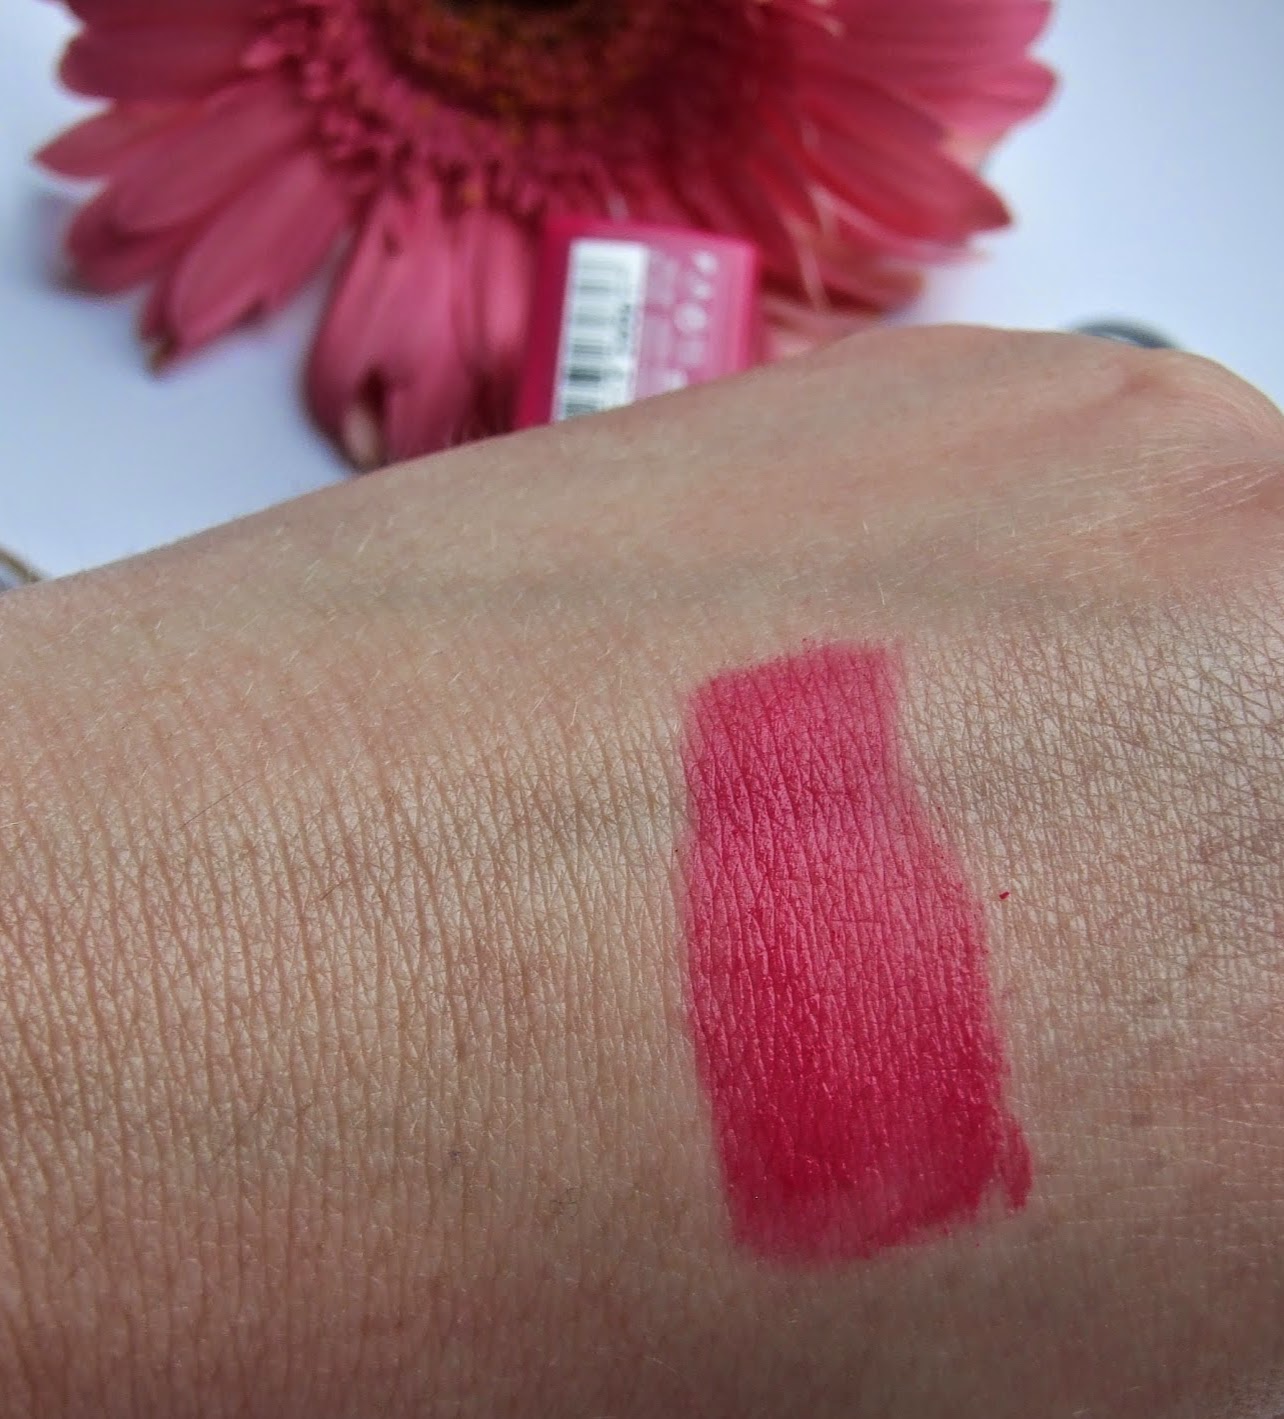 Bourjois Rouge Edition Velvet 06 Pink Pong lipstick stain gloss swatch review